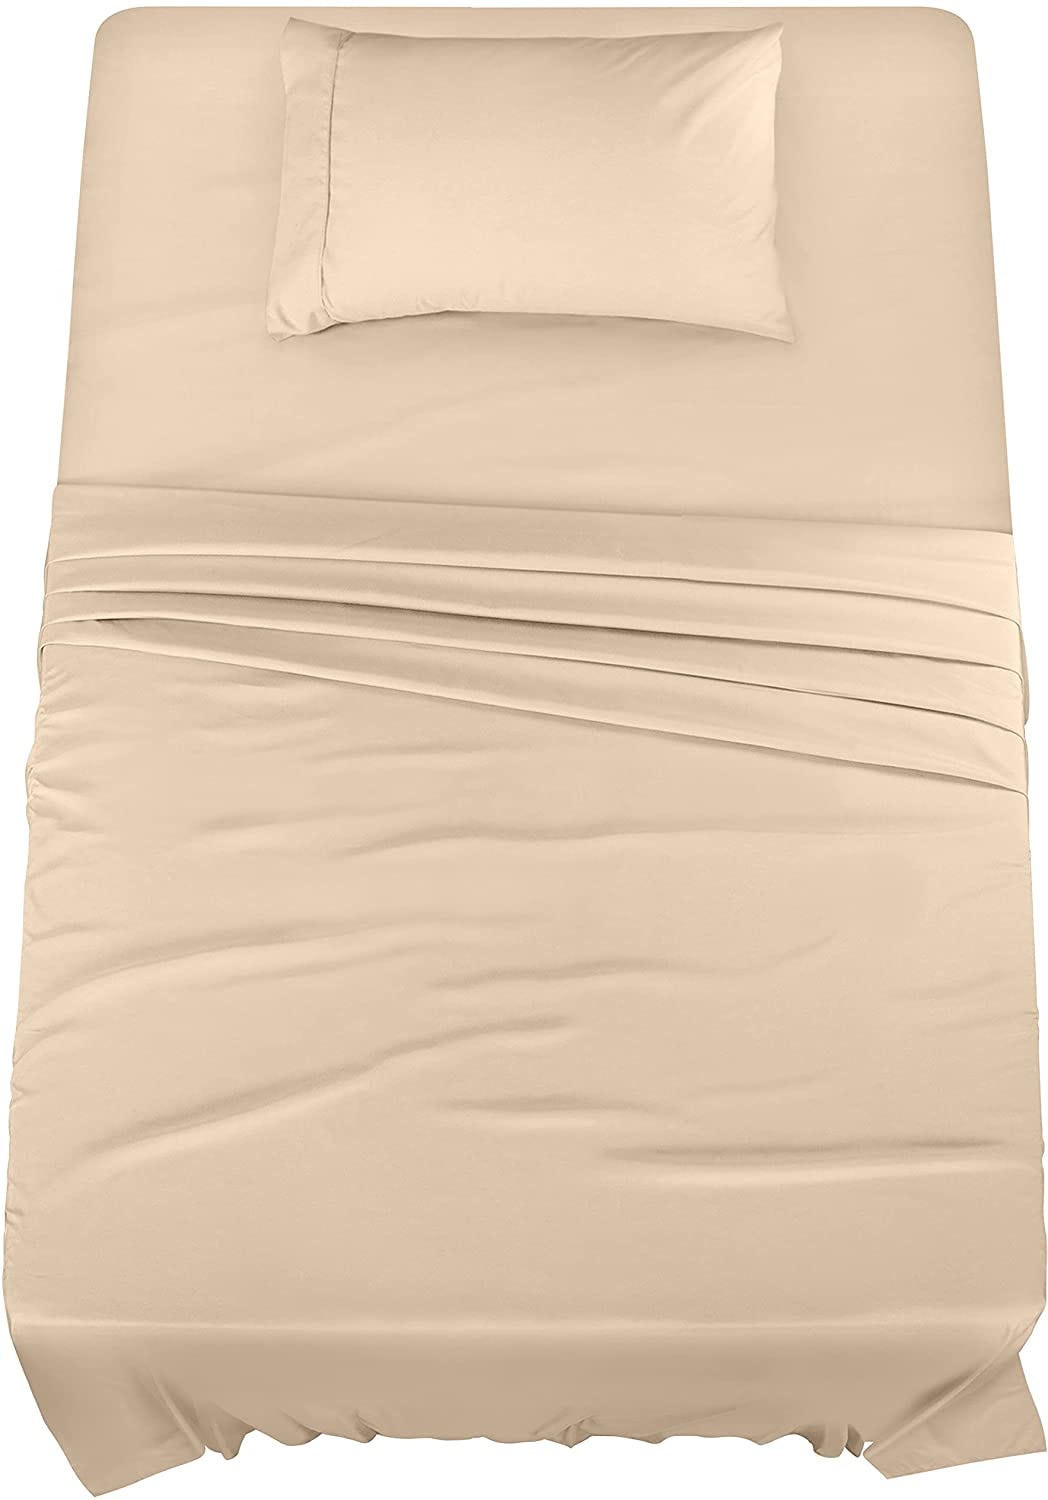 Utopia Bedding King Bed Sheets Set - 4 Piece Bedding - Brushed Microfiber -  Shrinkage and Fade Resistant - Easy